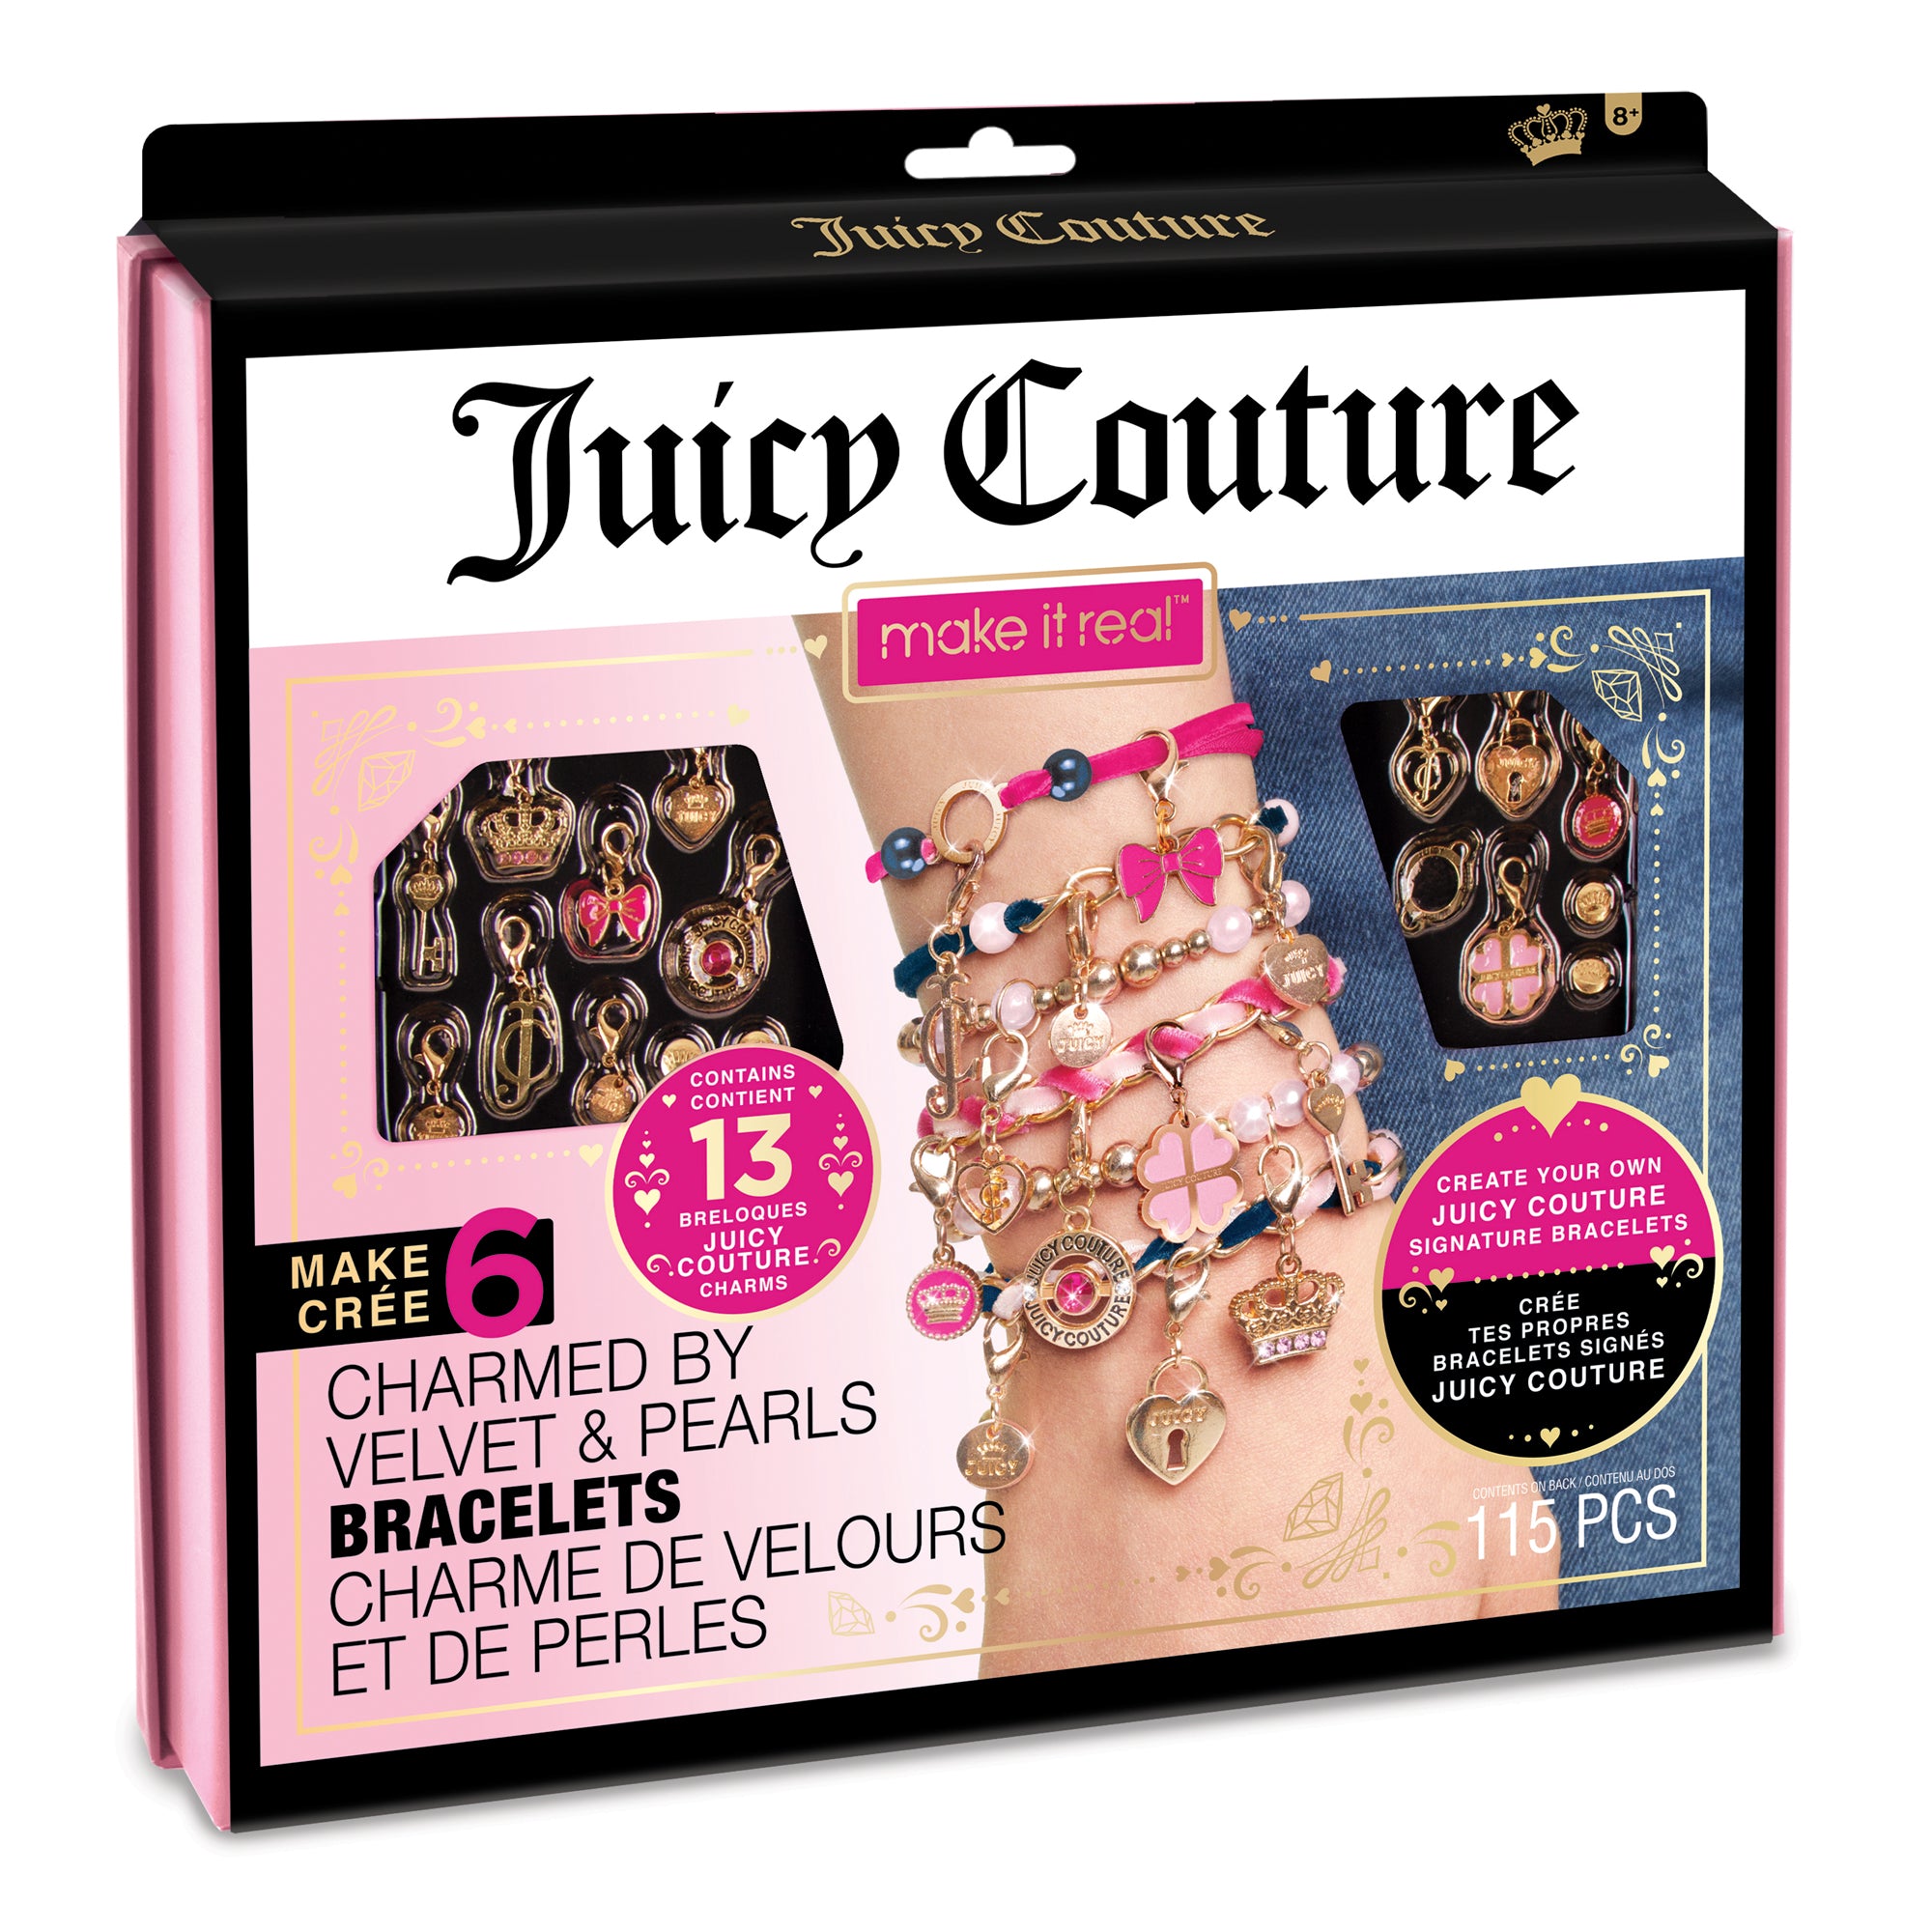 Juicy Couture™ Charmed by Velvet & Pearls Bracelets – Make It Real